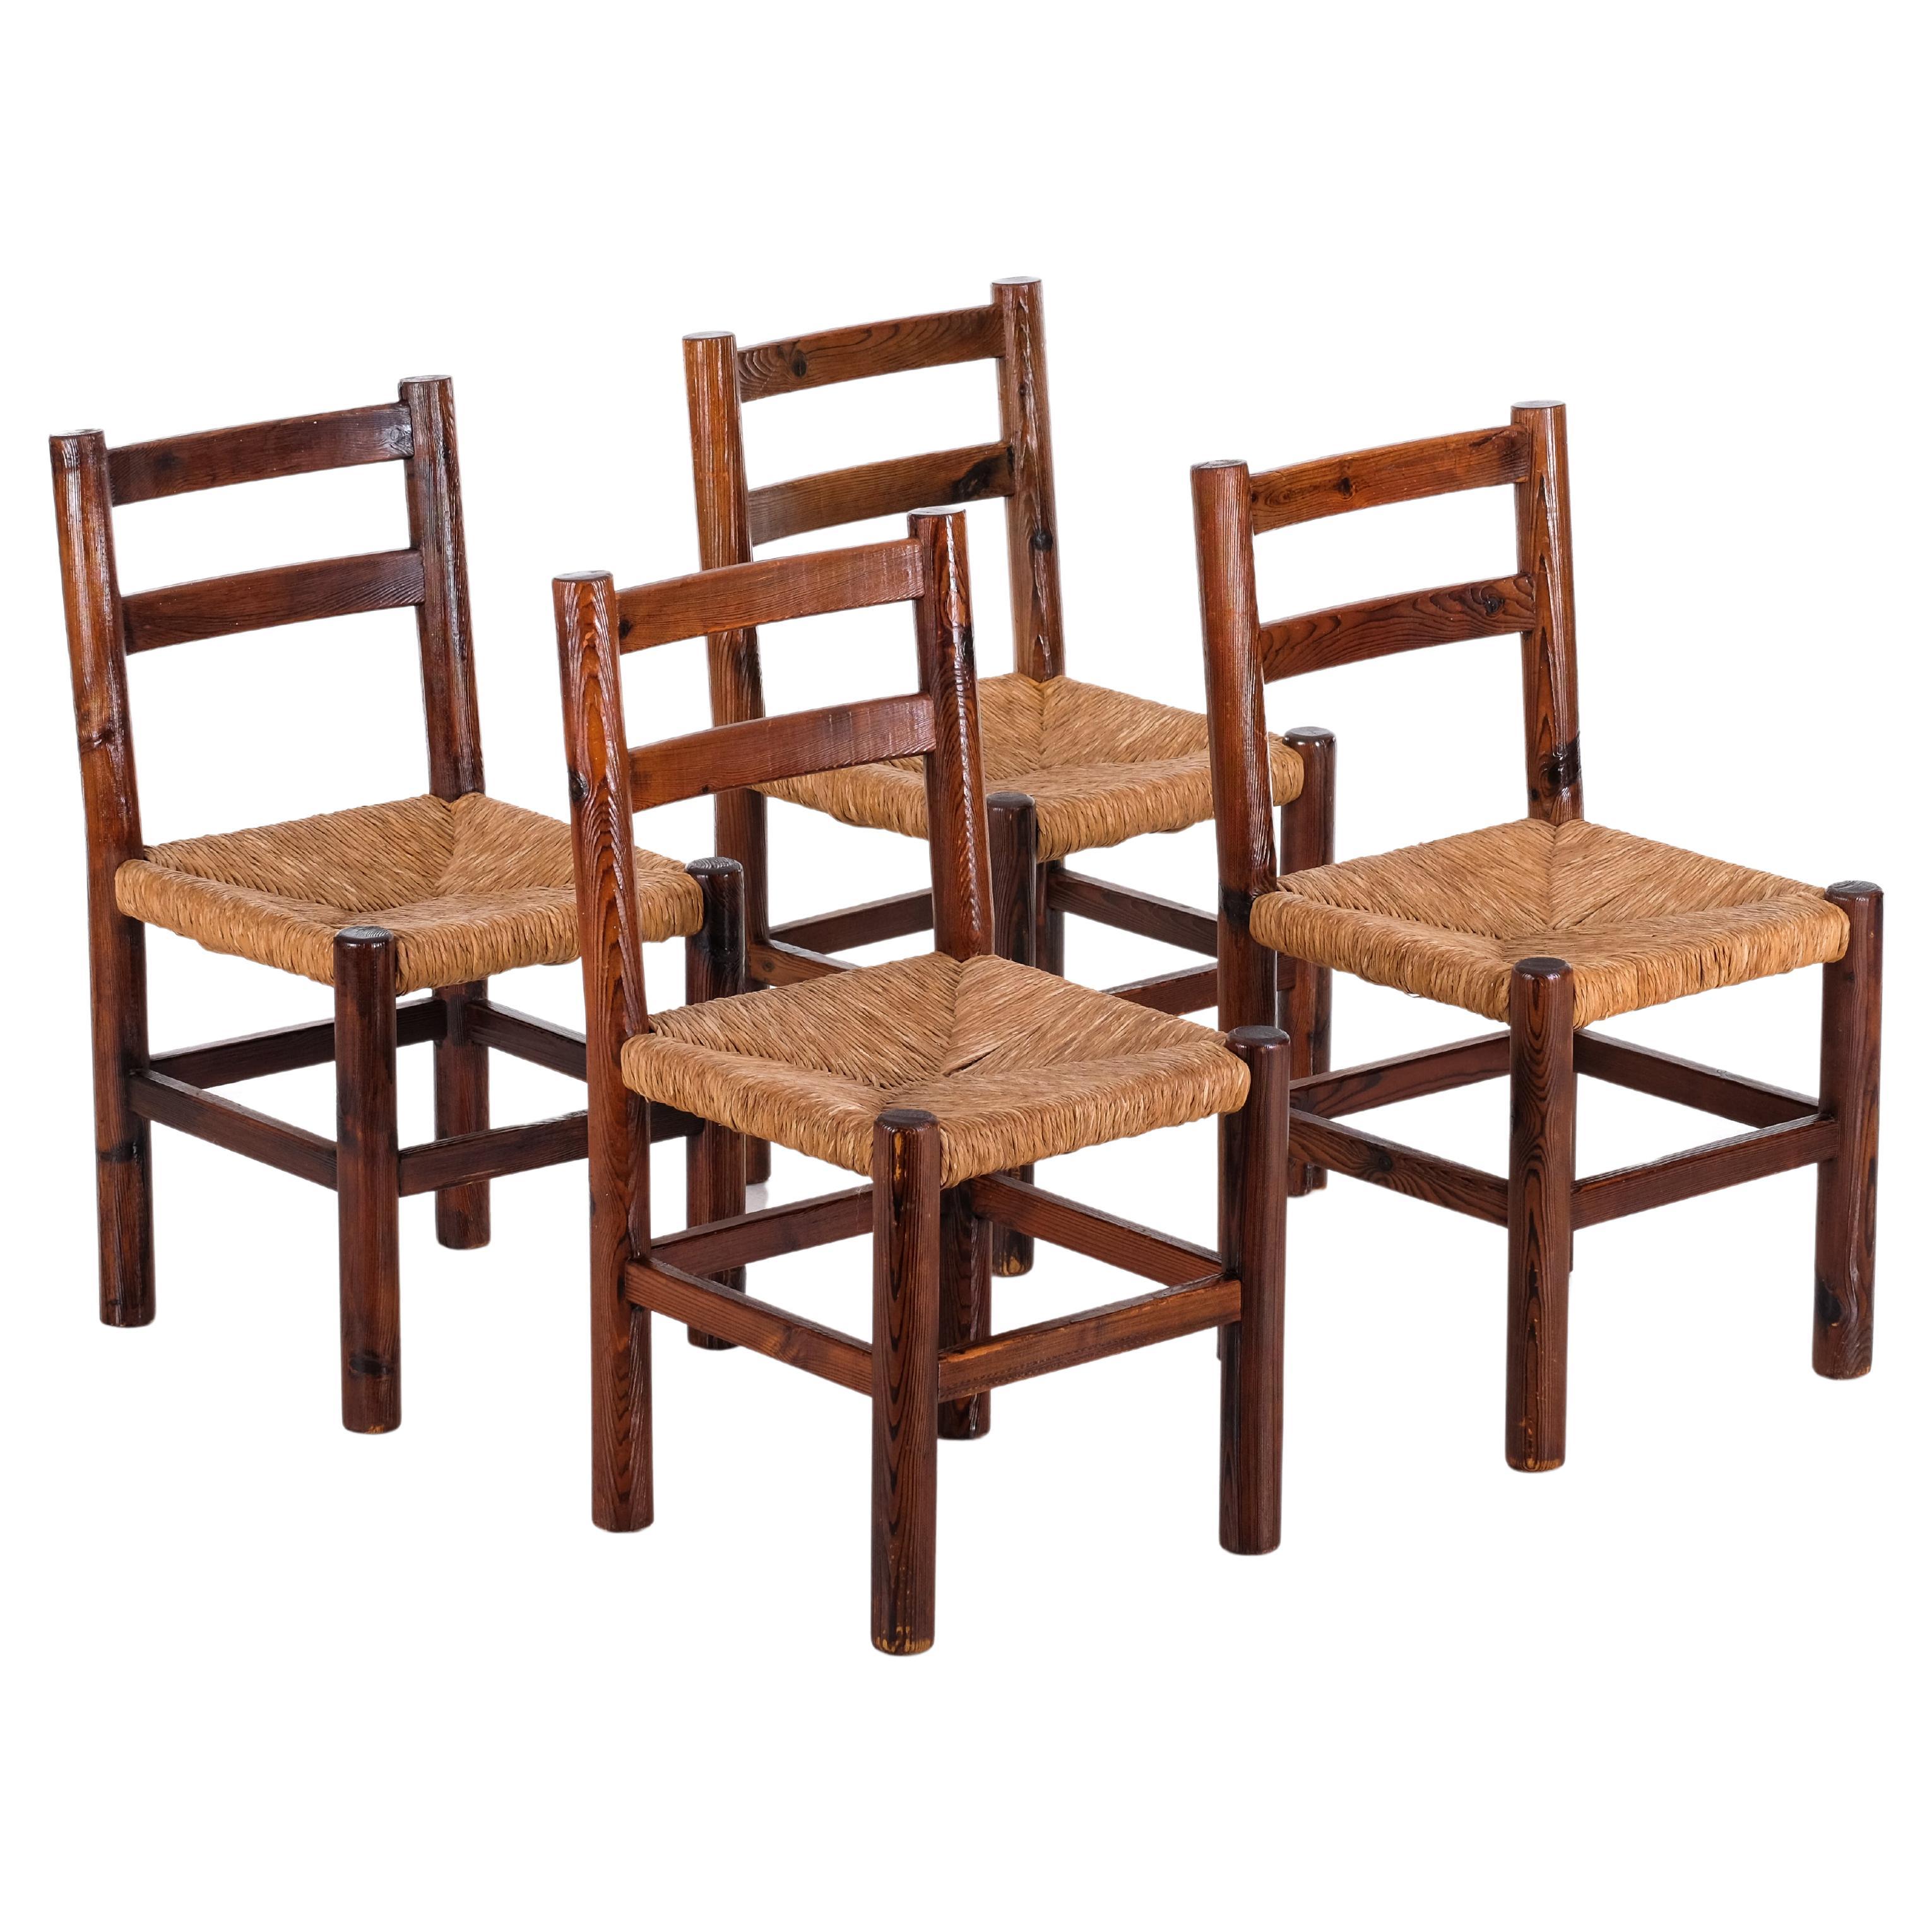 Set of 4 pine chairs, 1960s